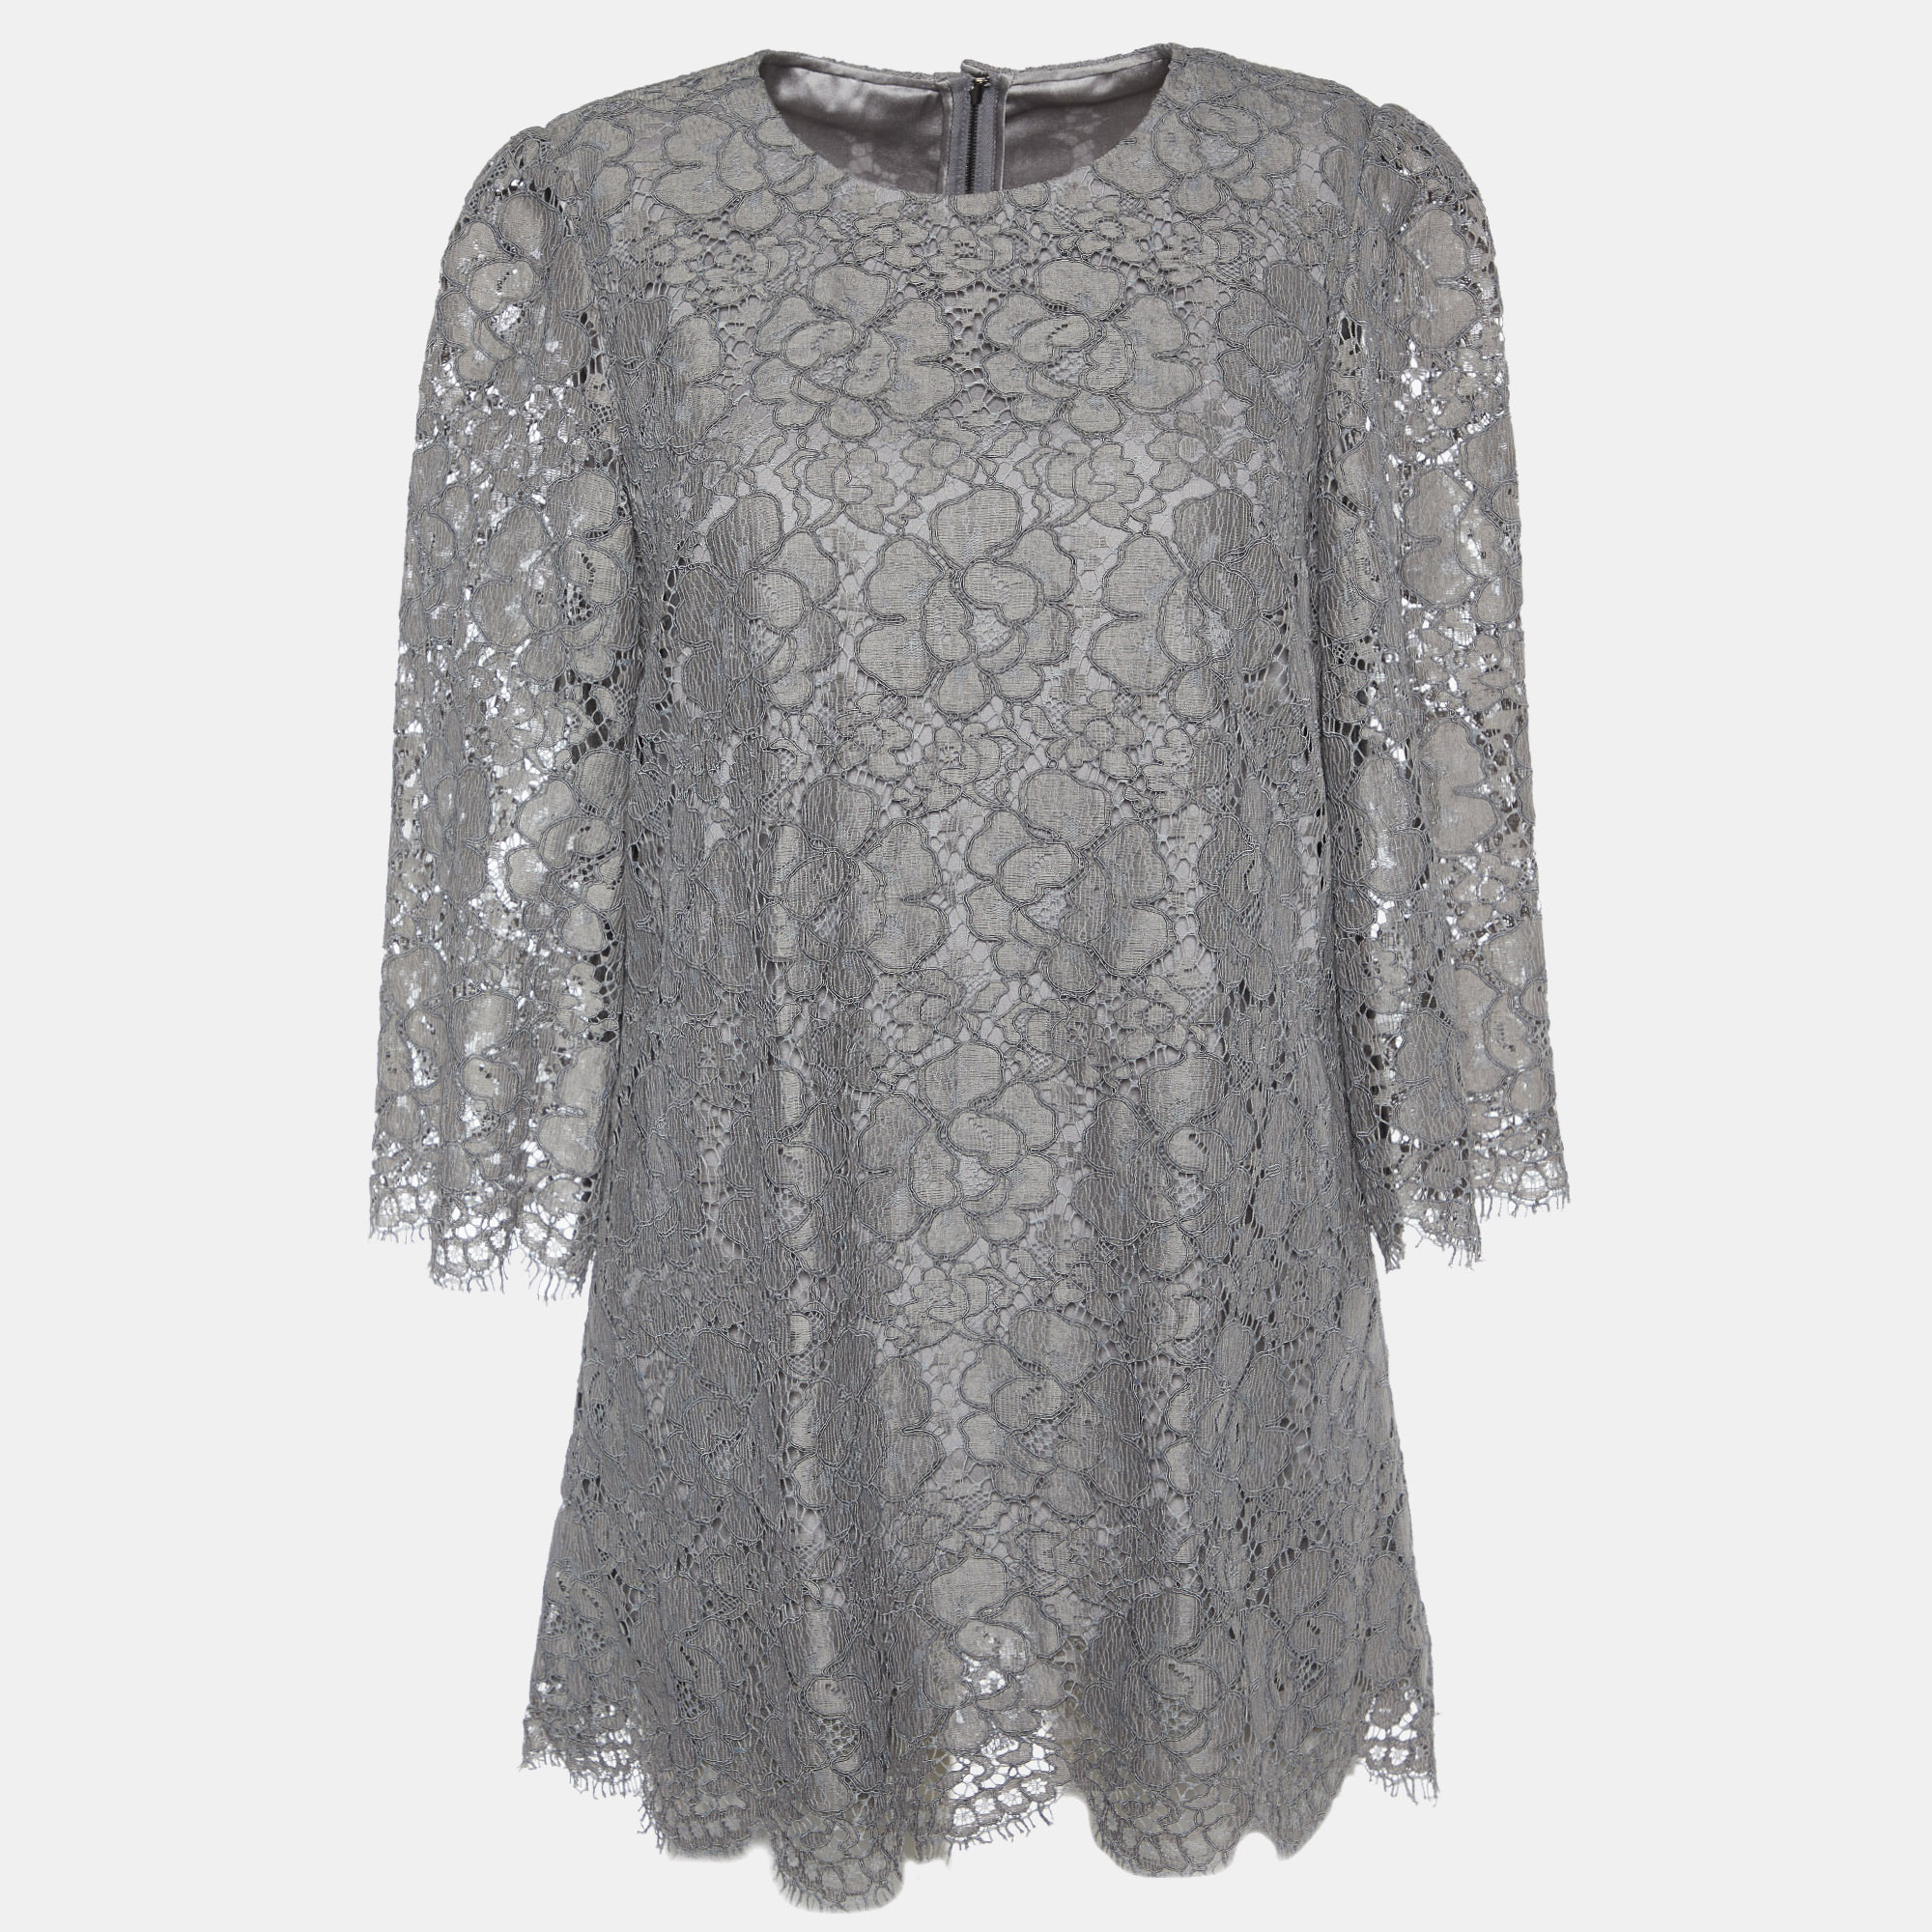 

Dolce & Gabbana Grey Floral Corded Lace Three Quarter Sleeve Top